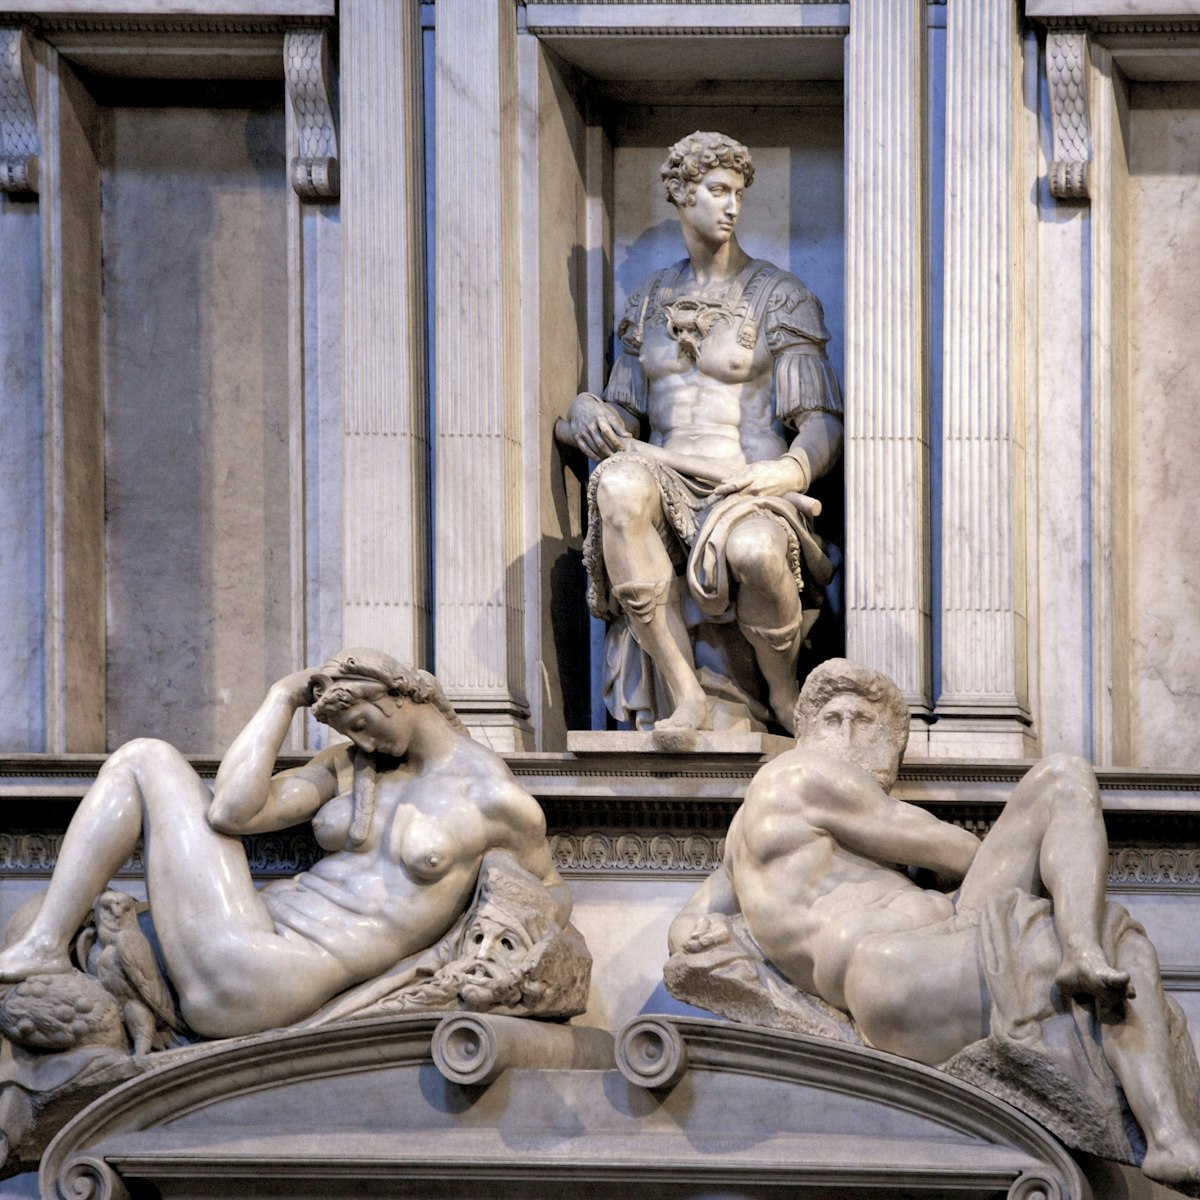 Europe, Italy, Tuscany, Florence, San Lorenzo, Medici Chapel, marble sculpture by Michelangelo, 1524-31, Night, Tomb of Giuliano de' Medici